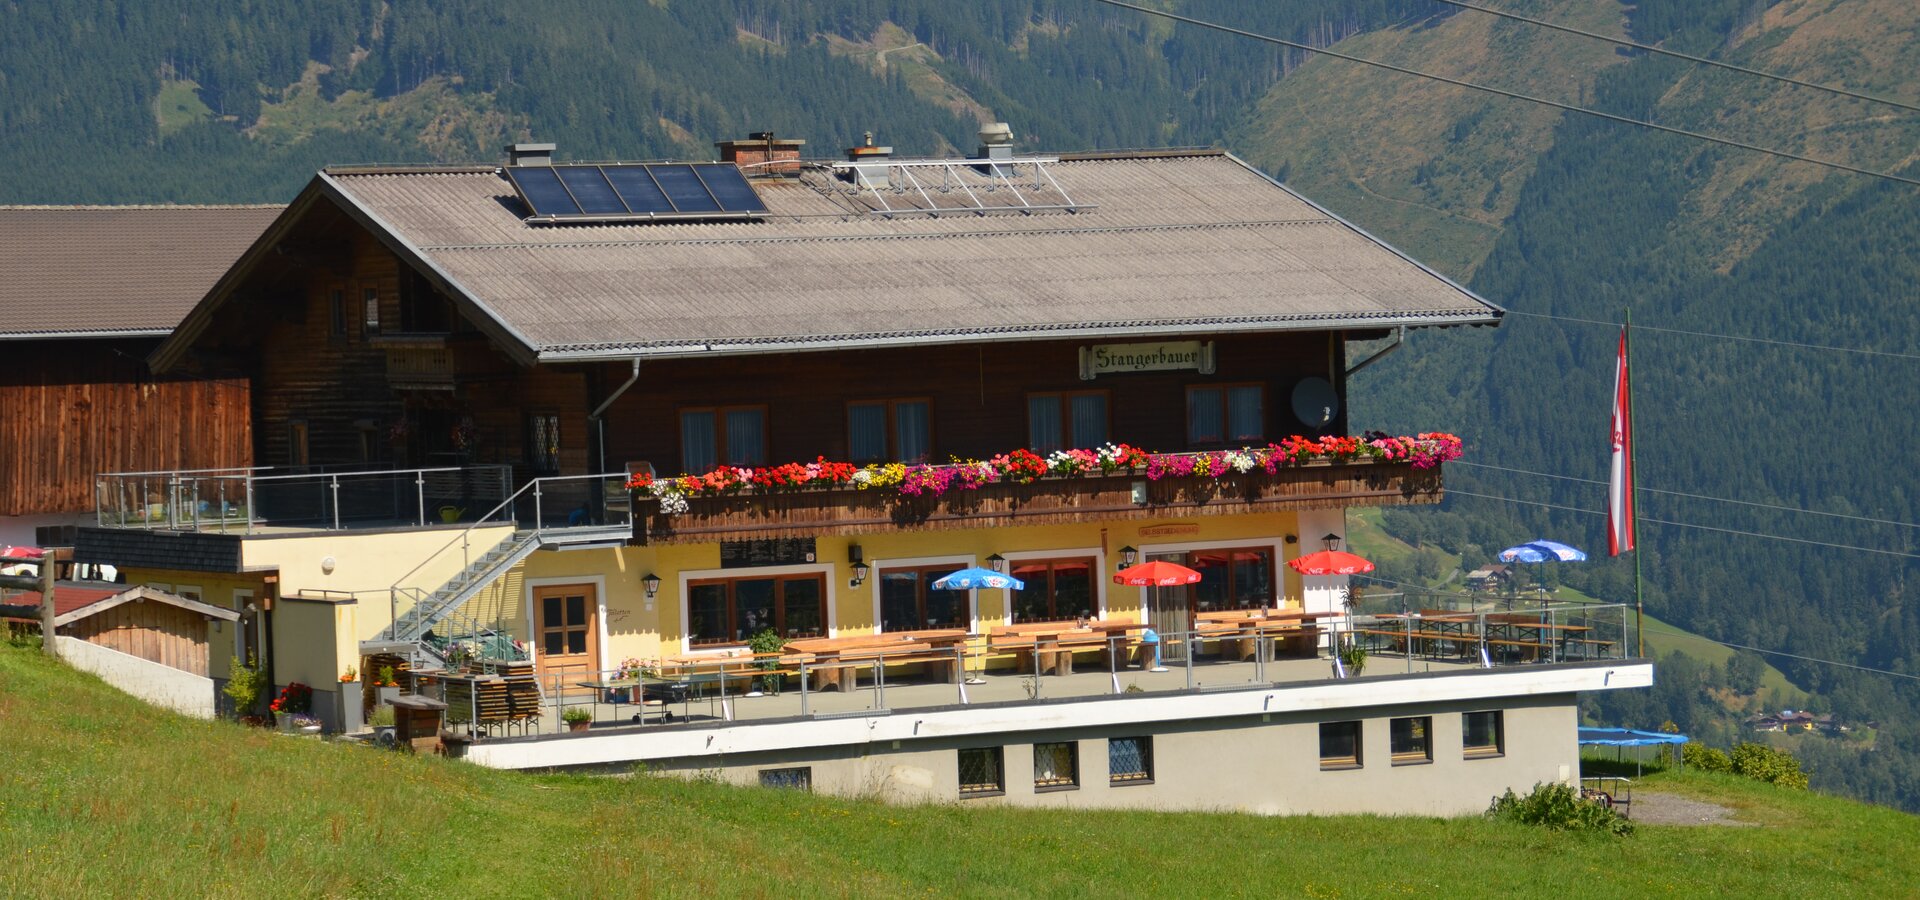 The inn is known for its down-to-earth regional cuisine and the homemade cakes | © Kitzsteinhorn